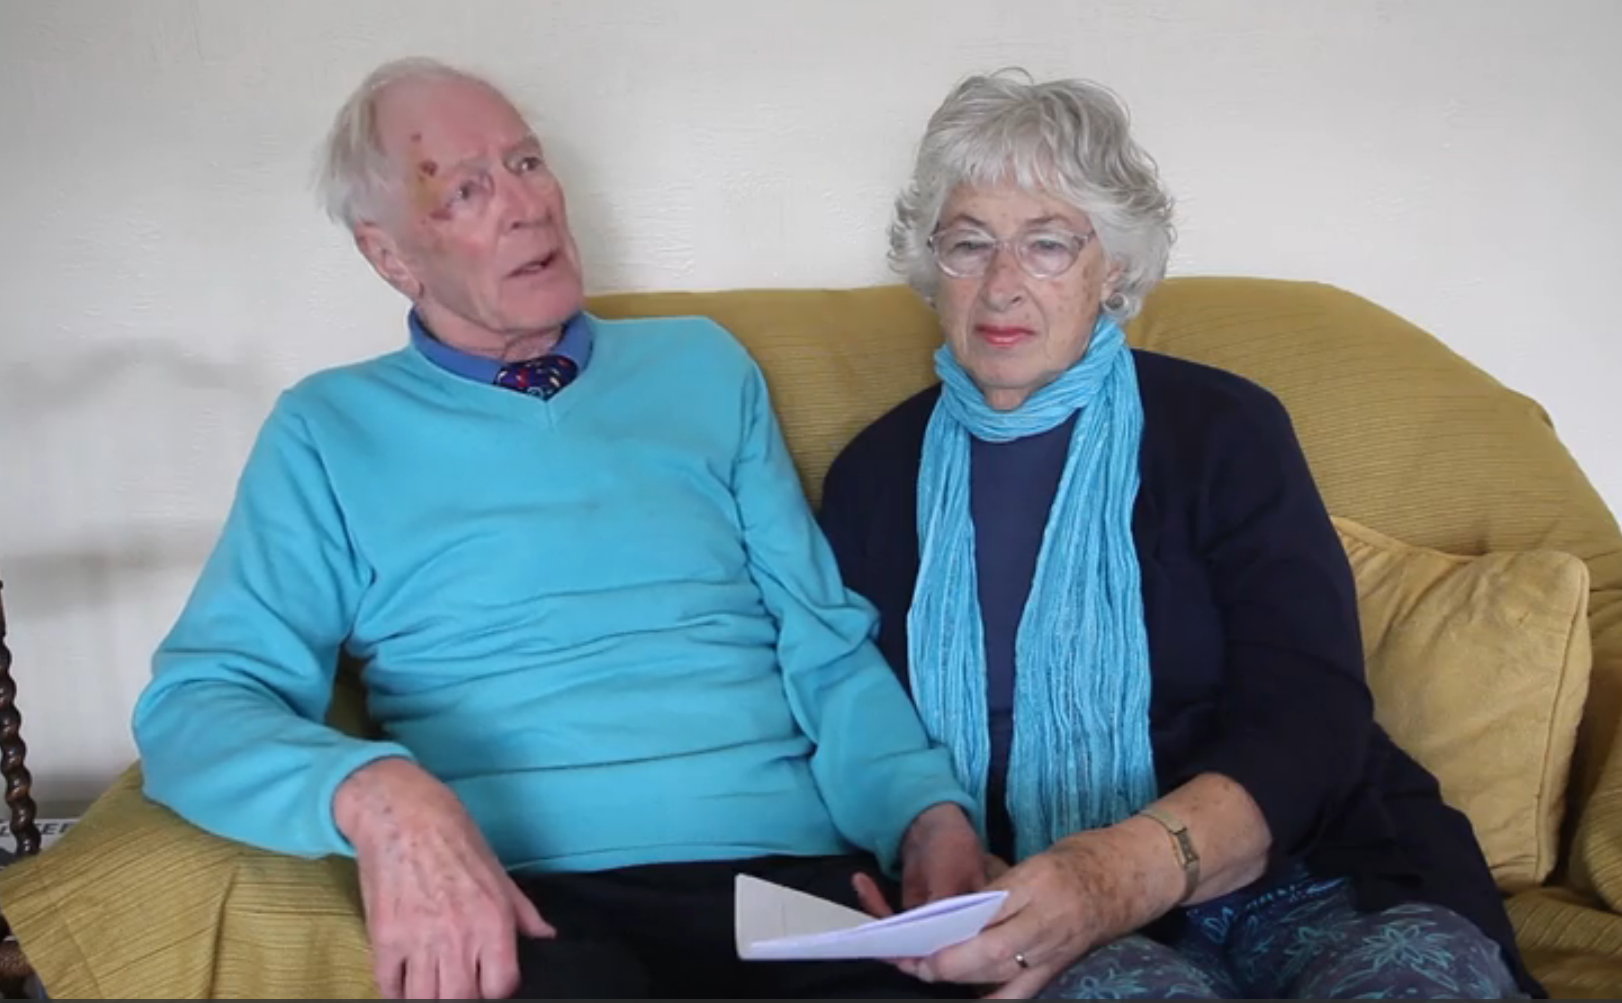 The 80-year-old found love online